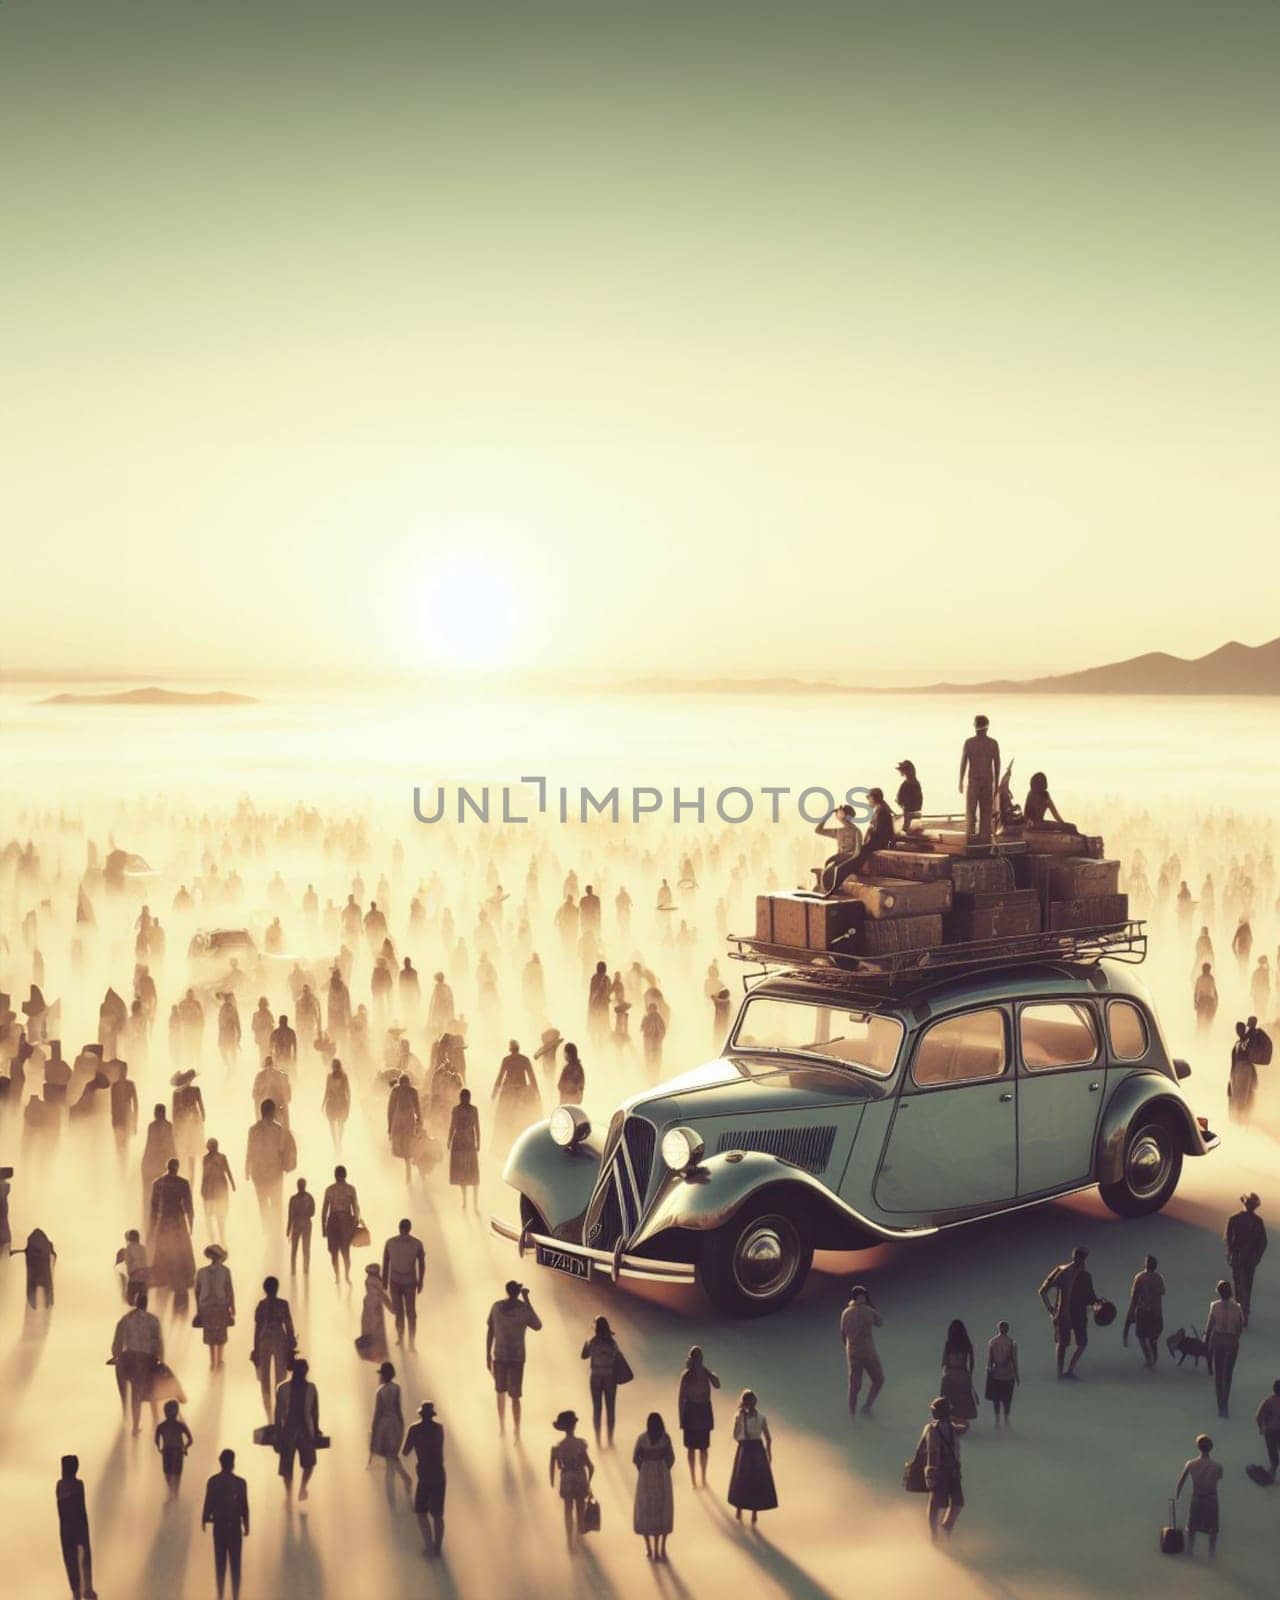 Huge Stack of luggage on crowded car roof , migration wave concept, steampunk retro illustration generated ai art